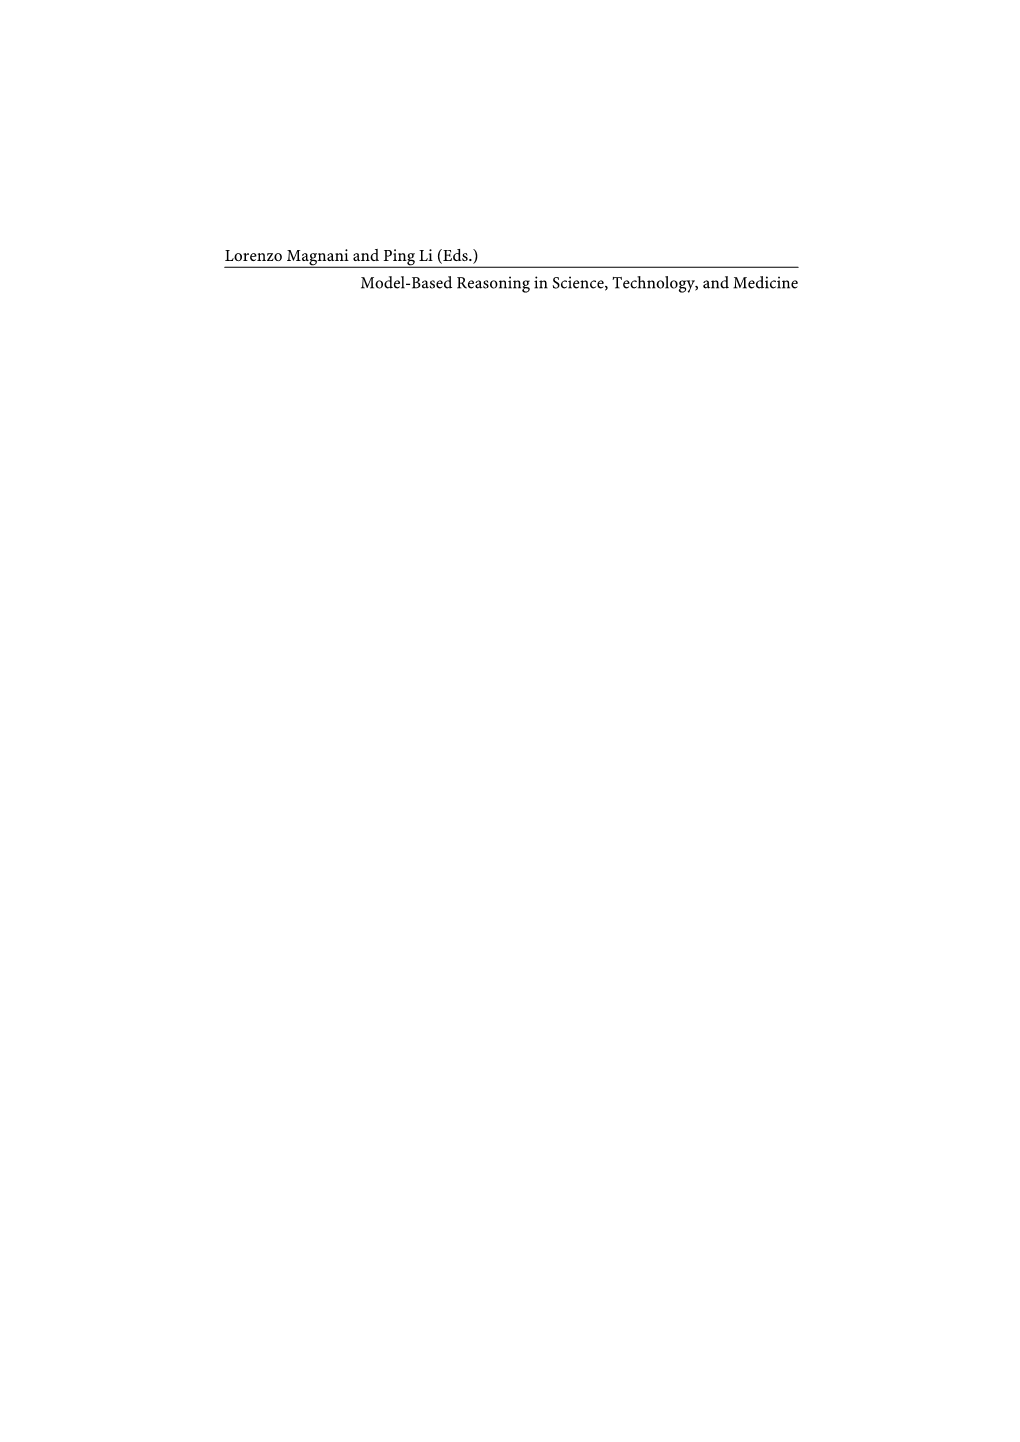 Model-Based Reasoning in Science, Technology, and Medicine Studies in Computational Intelligence, Volume 64 Editor-In-Chief Prof